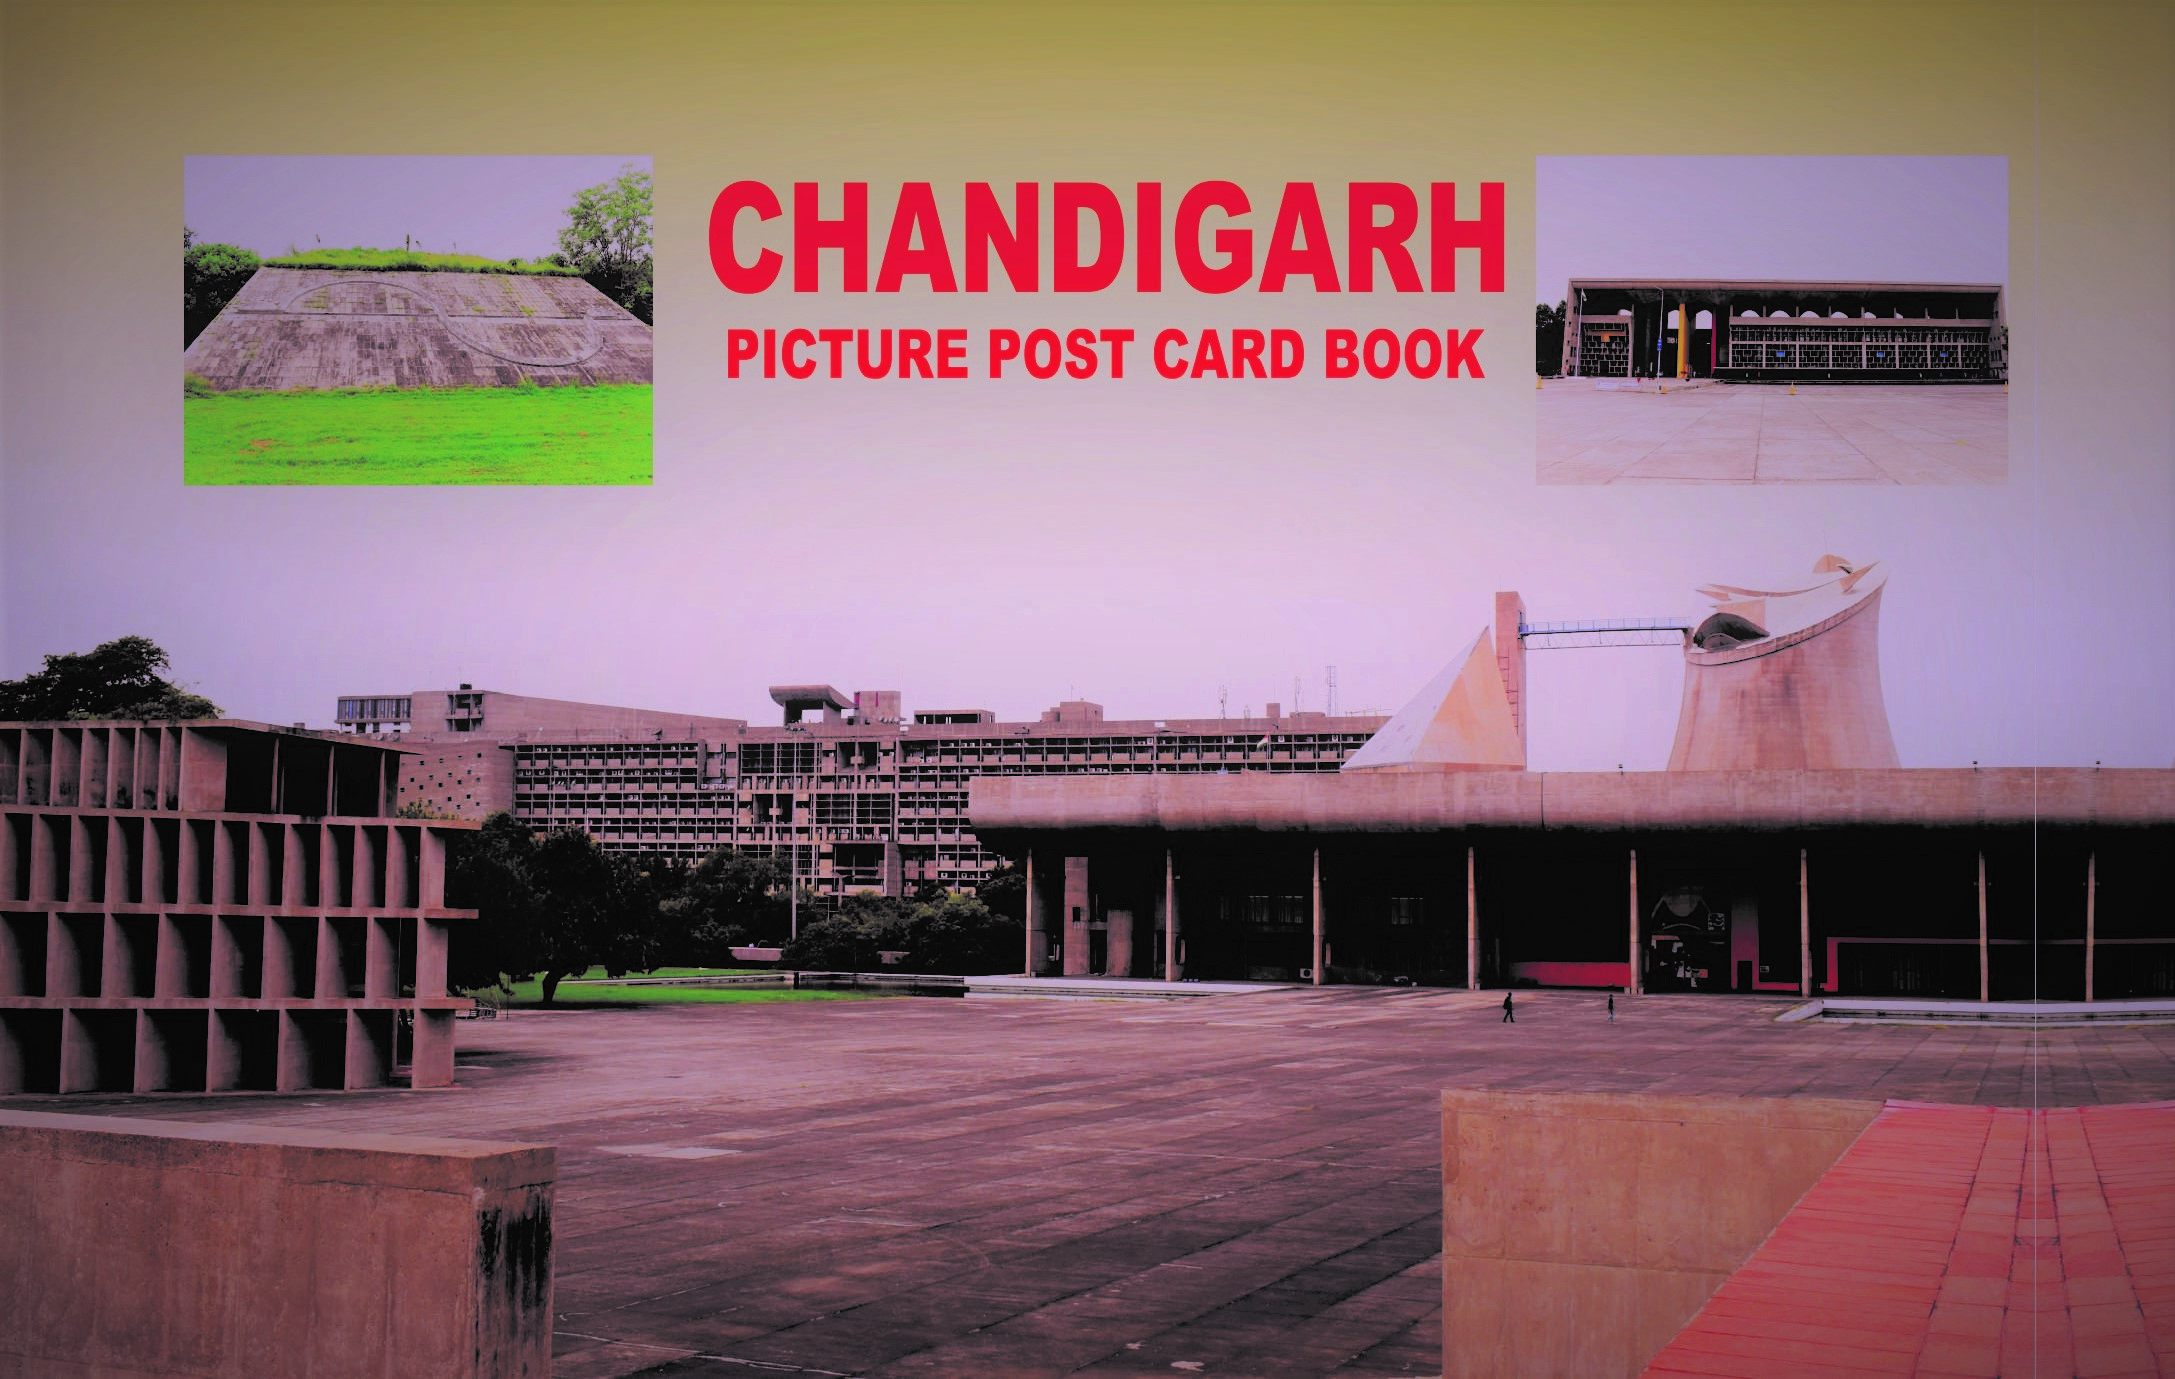 13.Chandigarh Picture Post Card Book